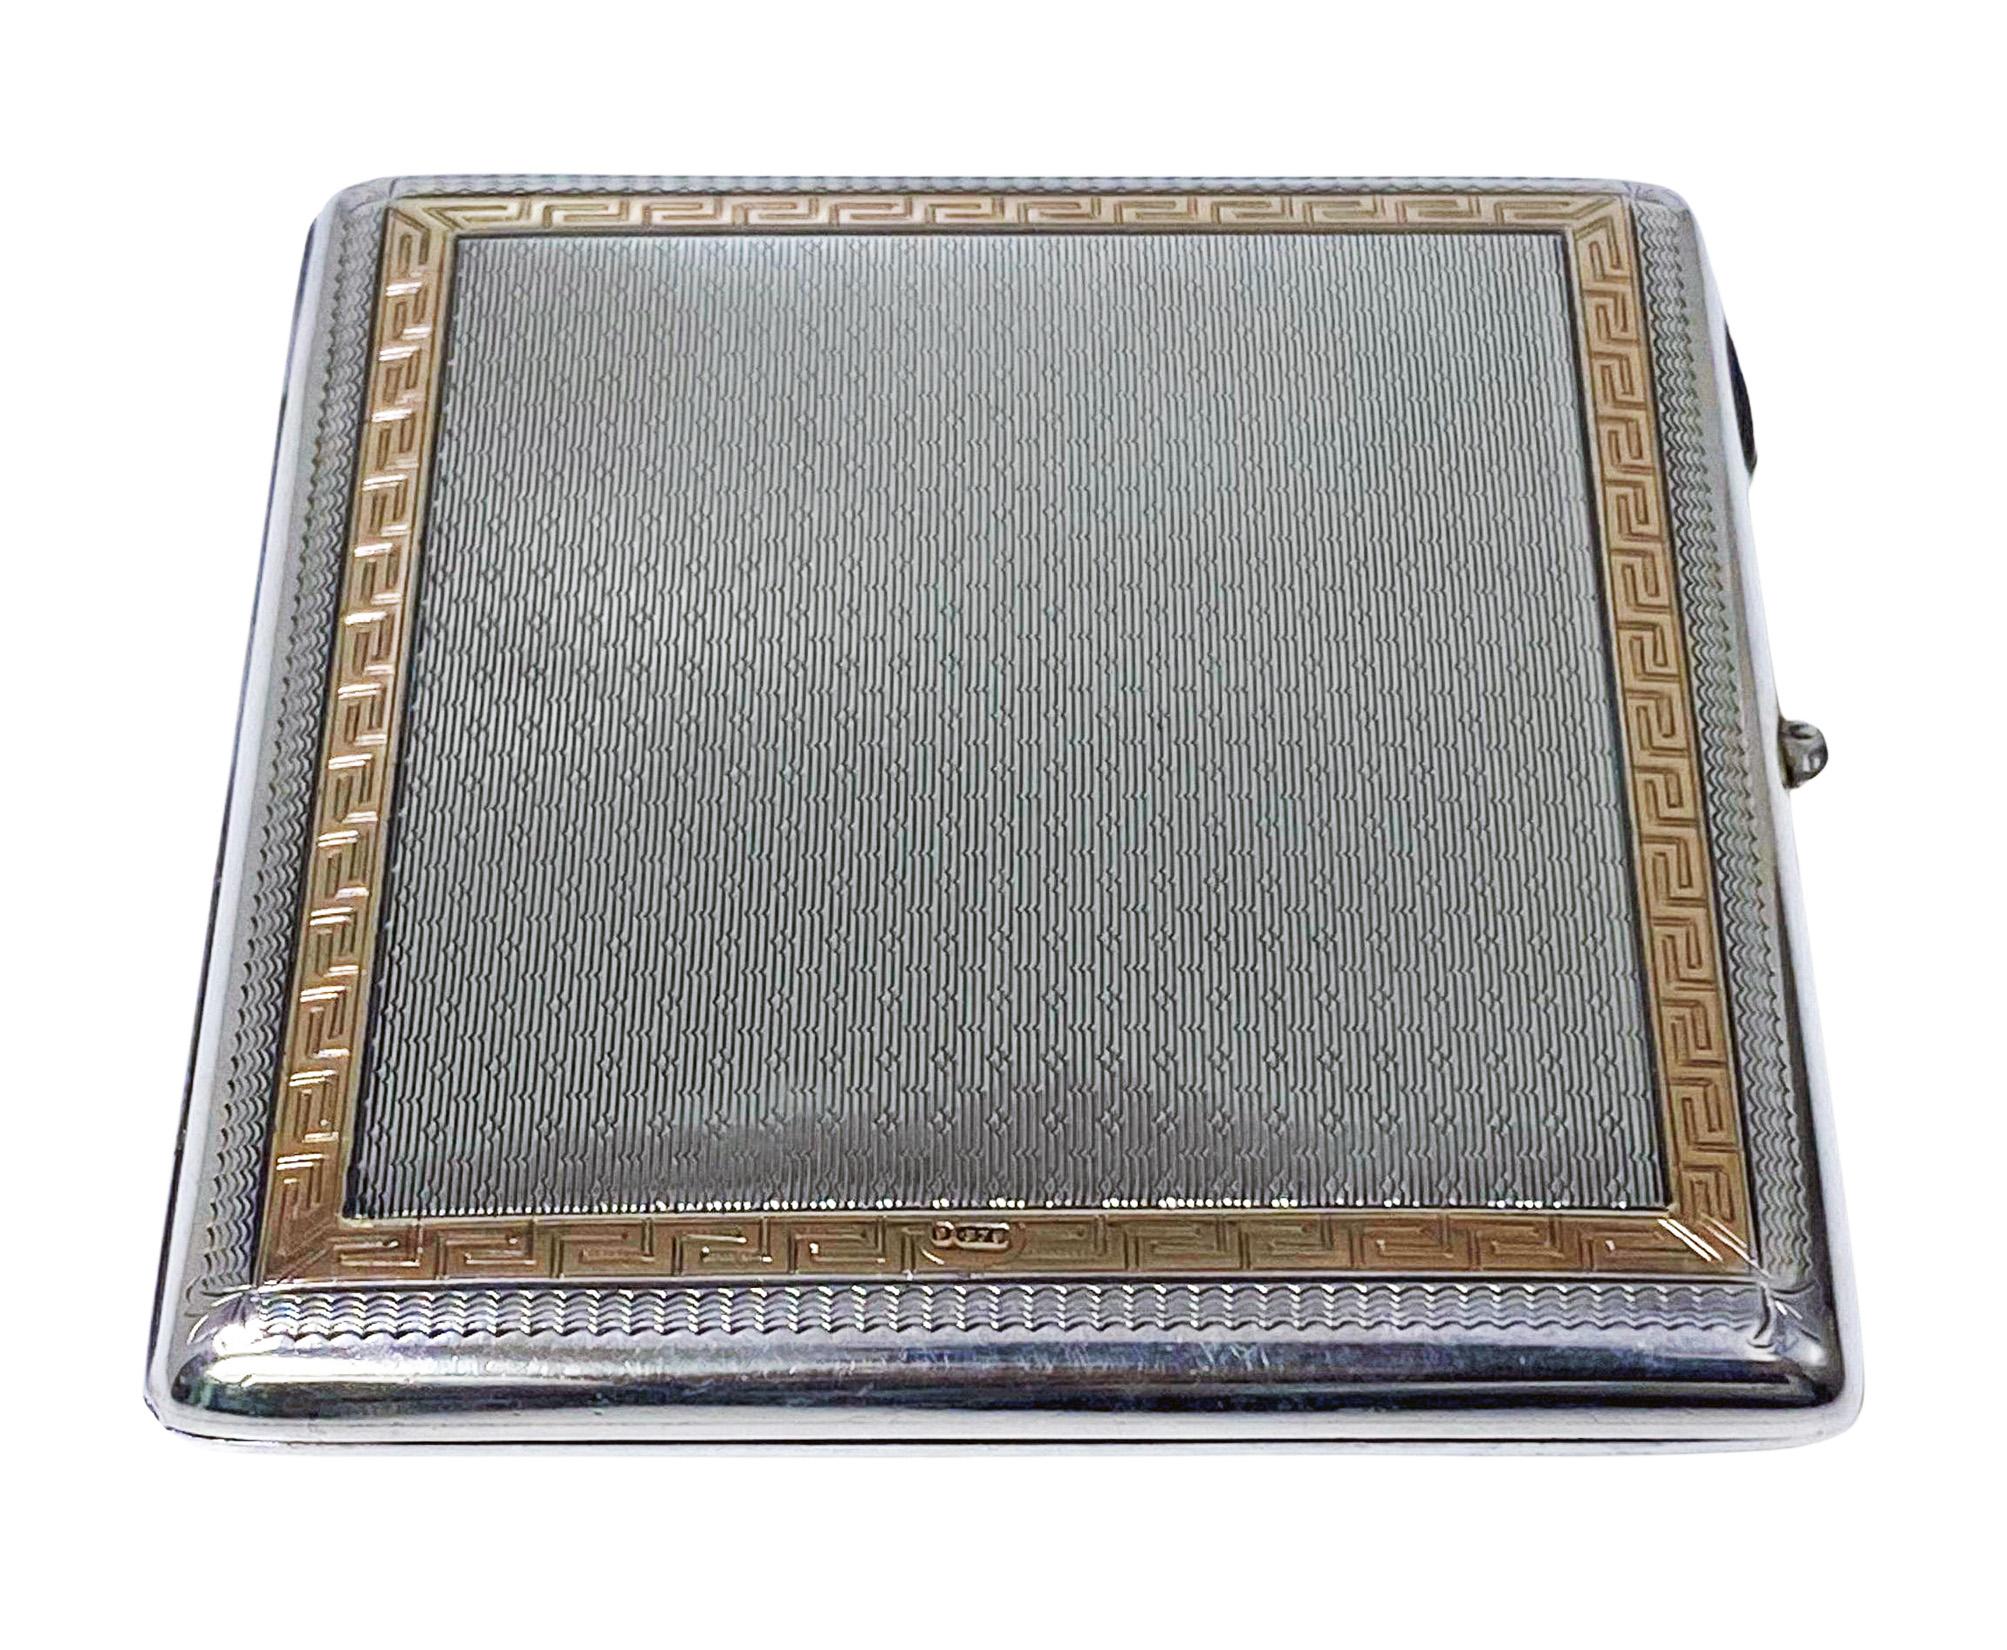 Antique Art Deco Sterling silver and 9ct gold cigarette case box Chester 1920, Colen Hewer Cheshire. Very finely decorated with an ogee type engine turn design on front and reverse with gold Greek key design inner border and outer wriggle work